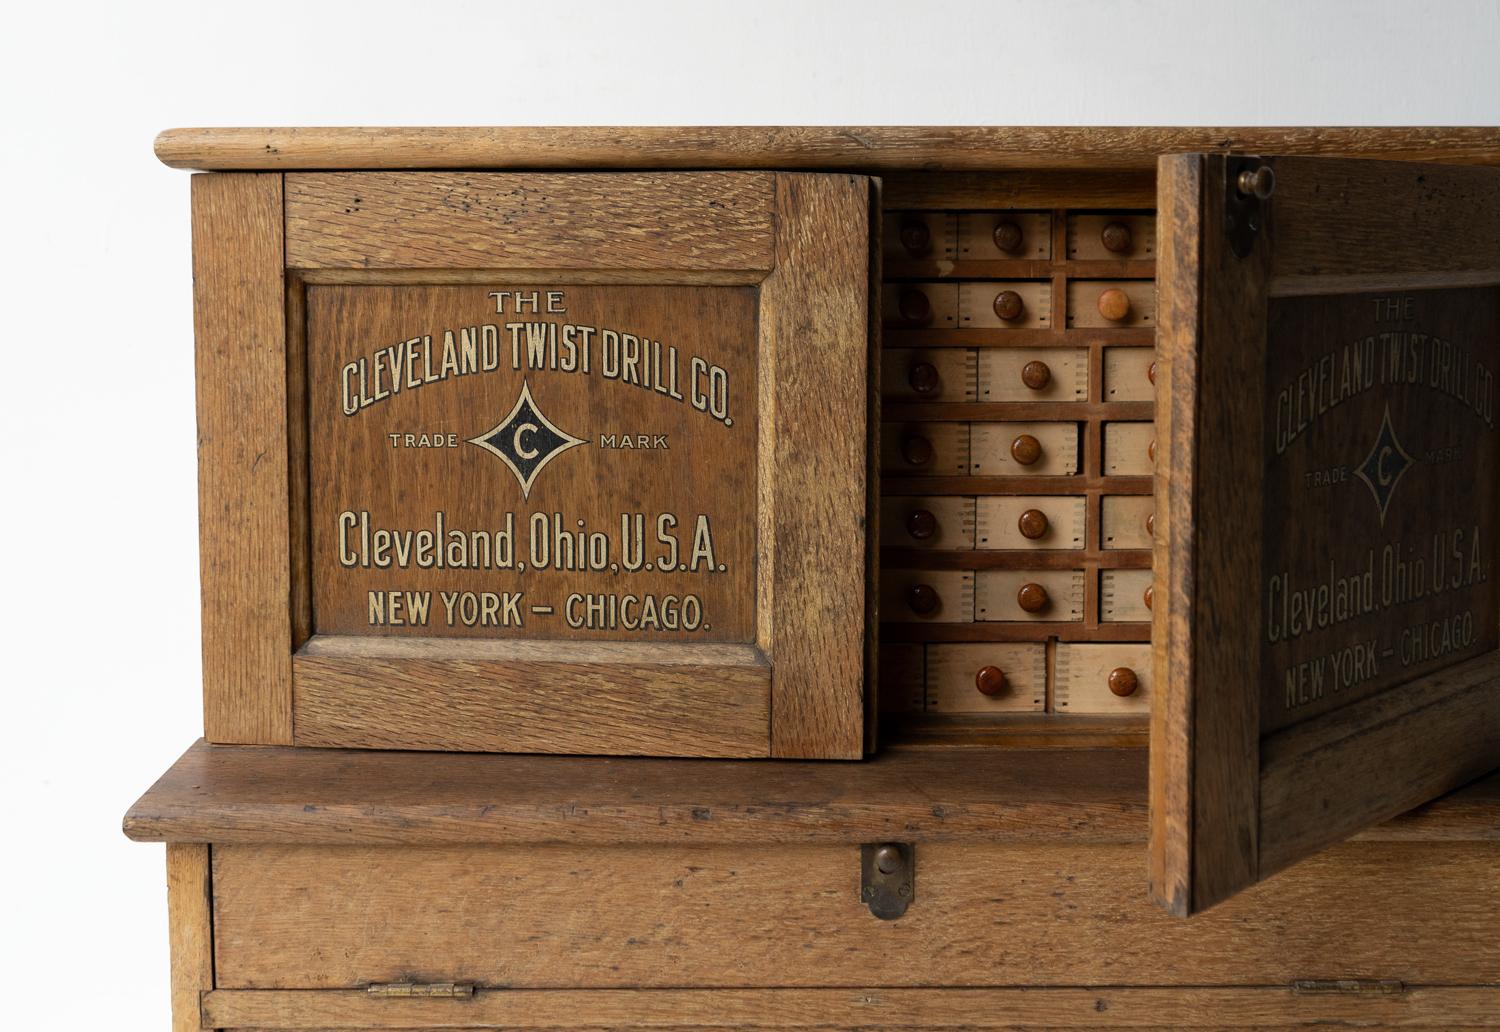 ANTIQUE OAK CABINET 

Made in the US as an in-store advertising piece for hardware stores to store and sell drill bits for ‘The Cleveland Twist Drill Co. Trade Mark, Clevland Ohio U.S.A. New York - Chicago.’  - written in a gilt typeface with a